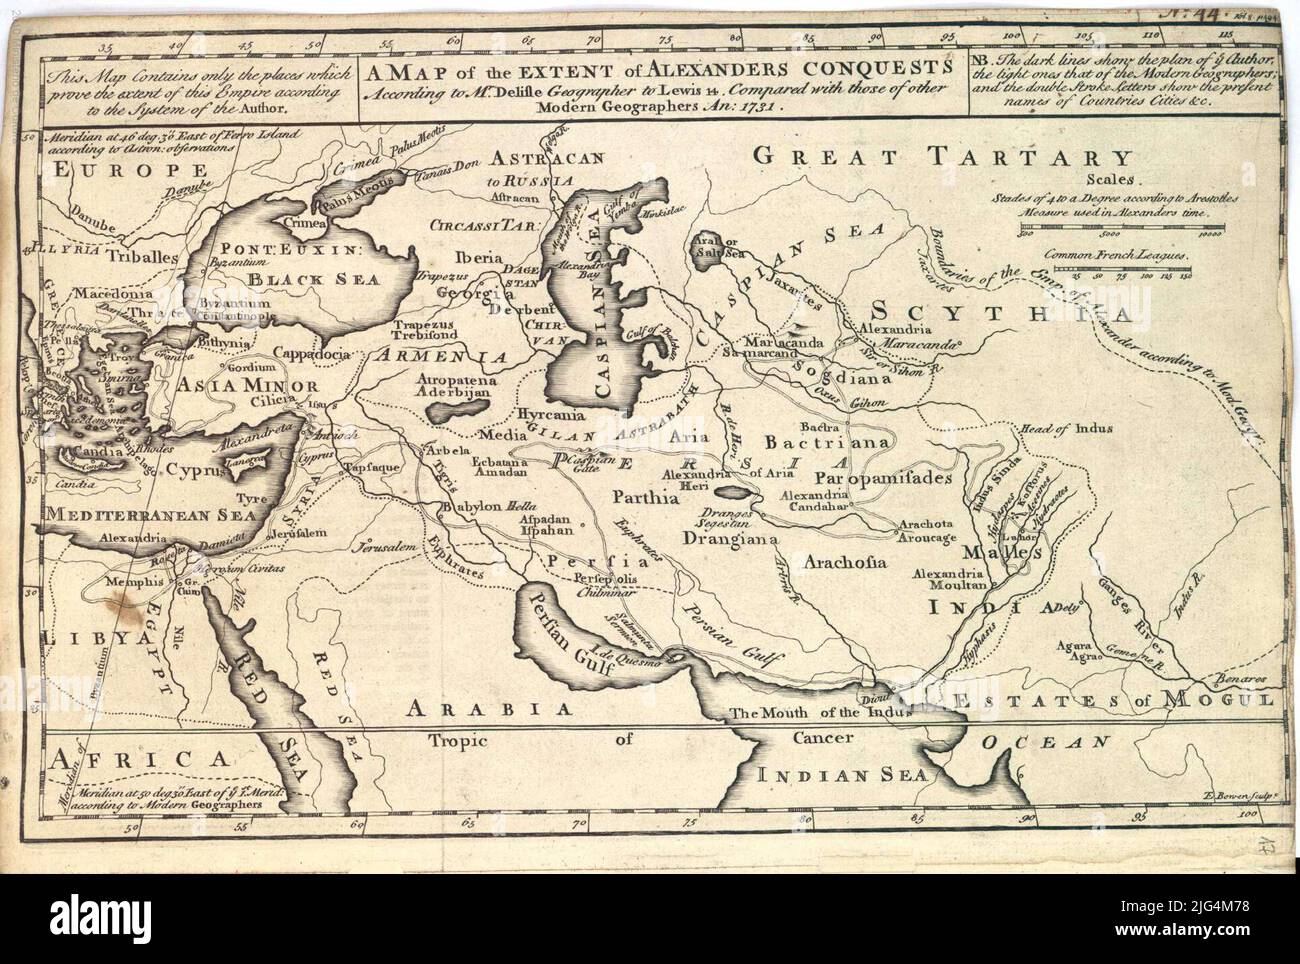 A map of the extent of Alexanders conquests According to Mr Delifle Geographer to Lewis 14. Compared with tose of other Moder Geographer An: 1731. Graduate margins indicates the tropics of meridian cancer of the Bizancio Ohzoncio Hydrographic Net Superior Right Explanatory Note: 'Nb The Dark Lines Show The Plan of Ye. Author, The Light Ovat of the Modern Geogrphers; and by Double Stroke Letters Show The Present Names of Countries Cities' Digital Copy. Madrid: Ministry of Culture, 2010 Stock Photo